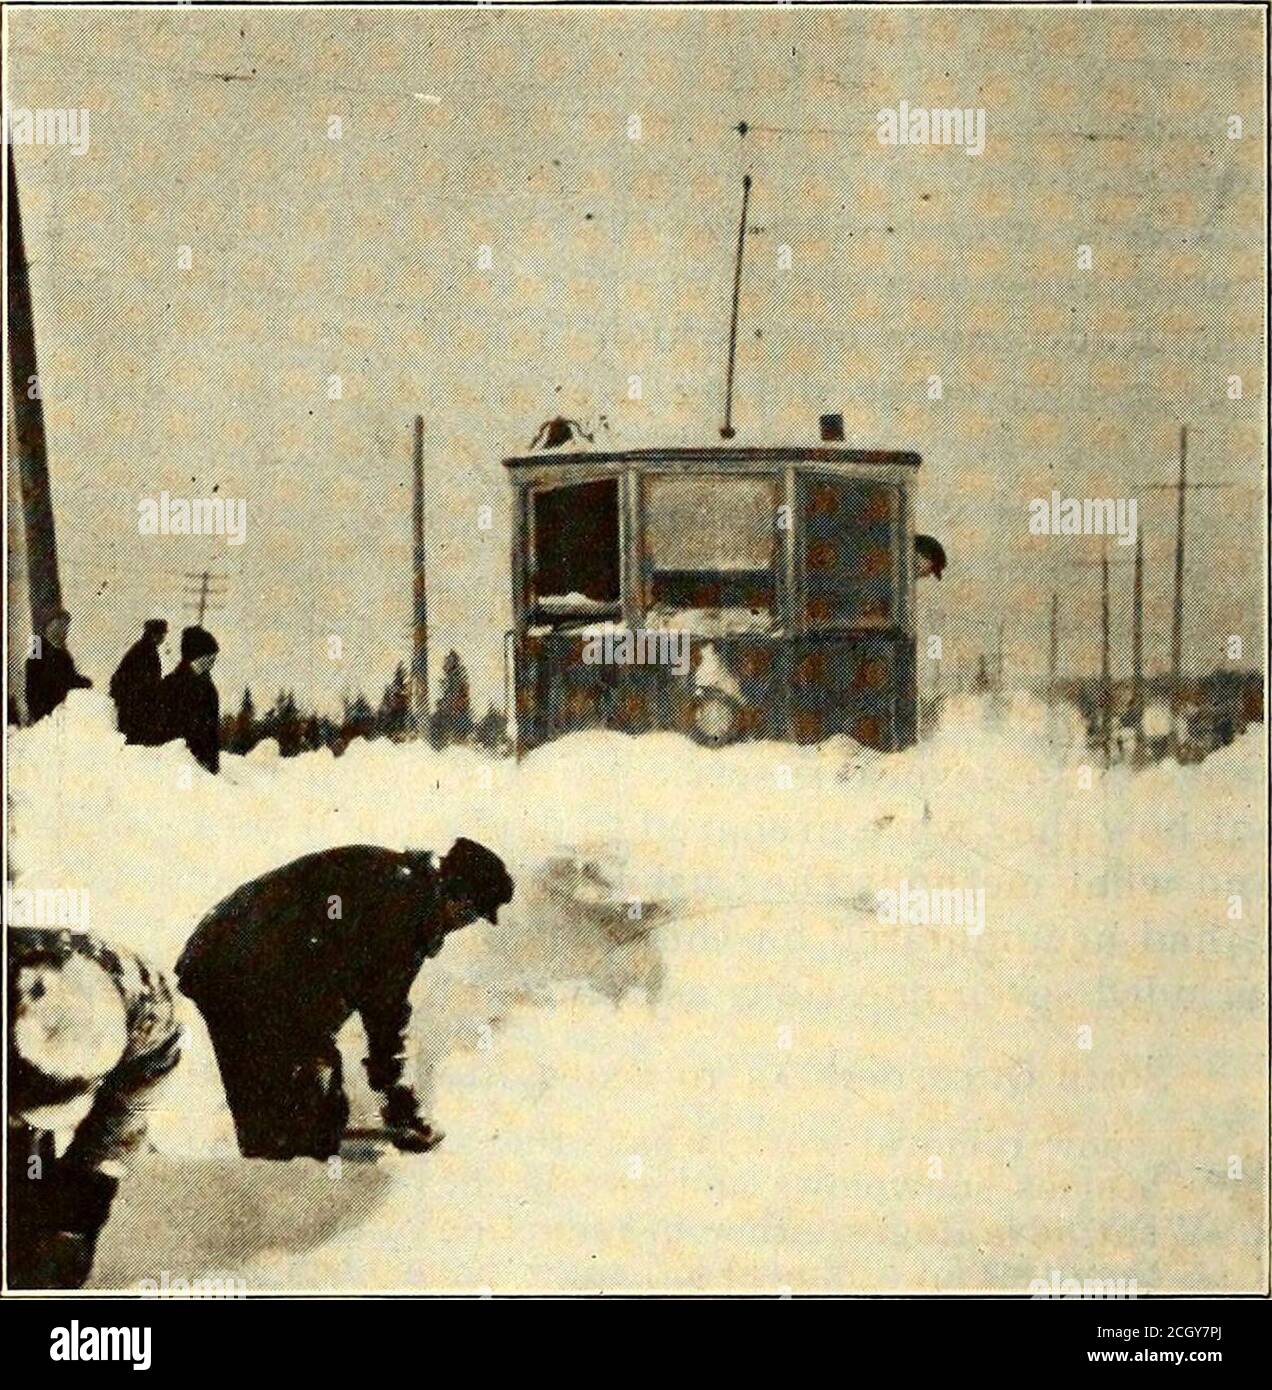 . Electric railway journal . the disposal of snow, and this method results in^uch shorter hauls. In some cases manholes are .4 iuS^ I^JIk ^ truck has its own route to cover. About twenty saltboxes are distributed at principal locations about thecity where there is a large amount of special work.The railway company has a private telephone dispatch-ing system operated from a central office in the mainoffice building with a telephone at the end of each carline and at other principal locations. This has provedinvaluable in carrying out the snow-fighting program. Chicago Has Immense Wing Plow Prope Stock Photo